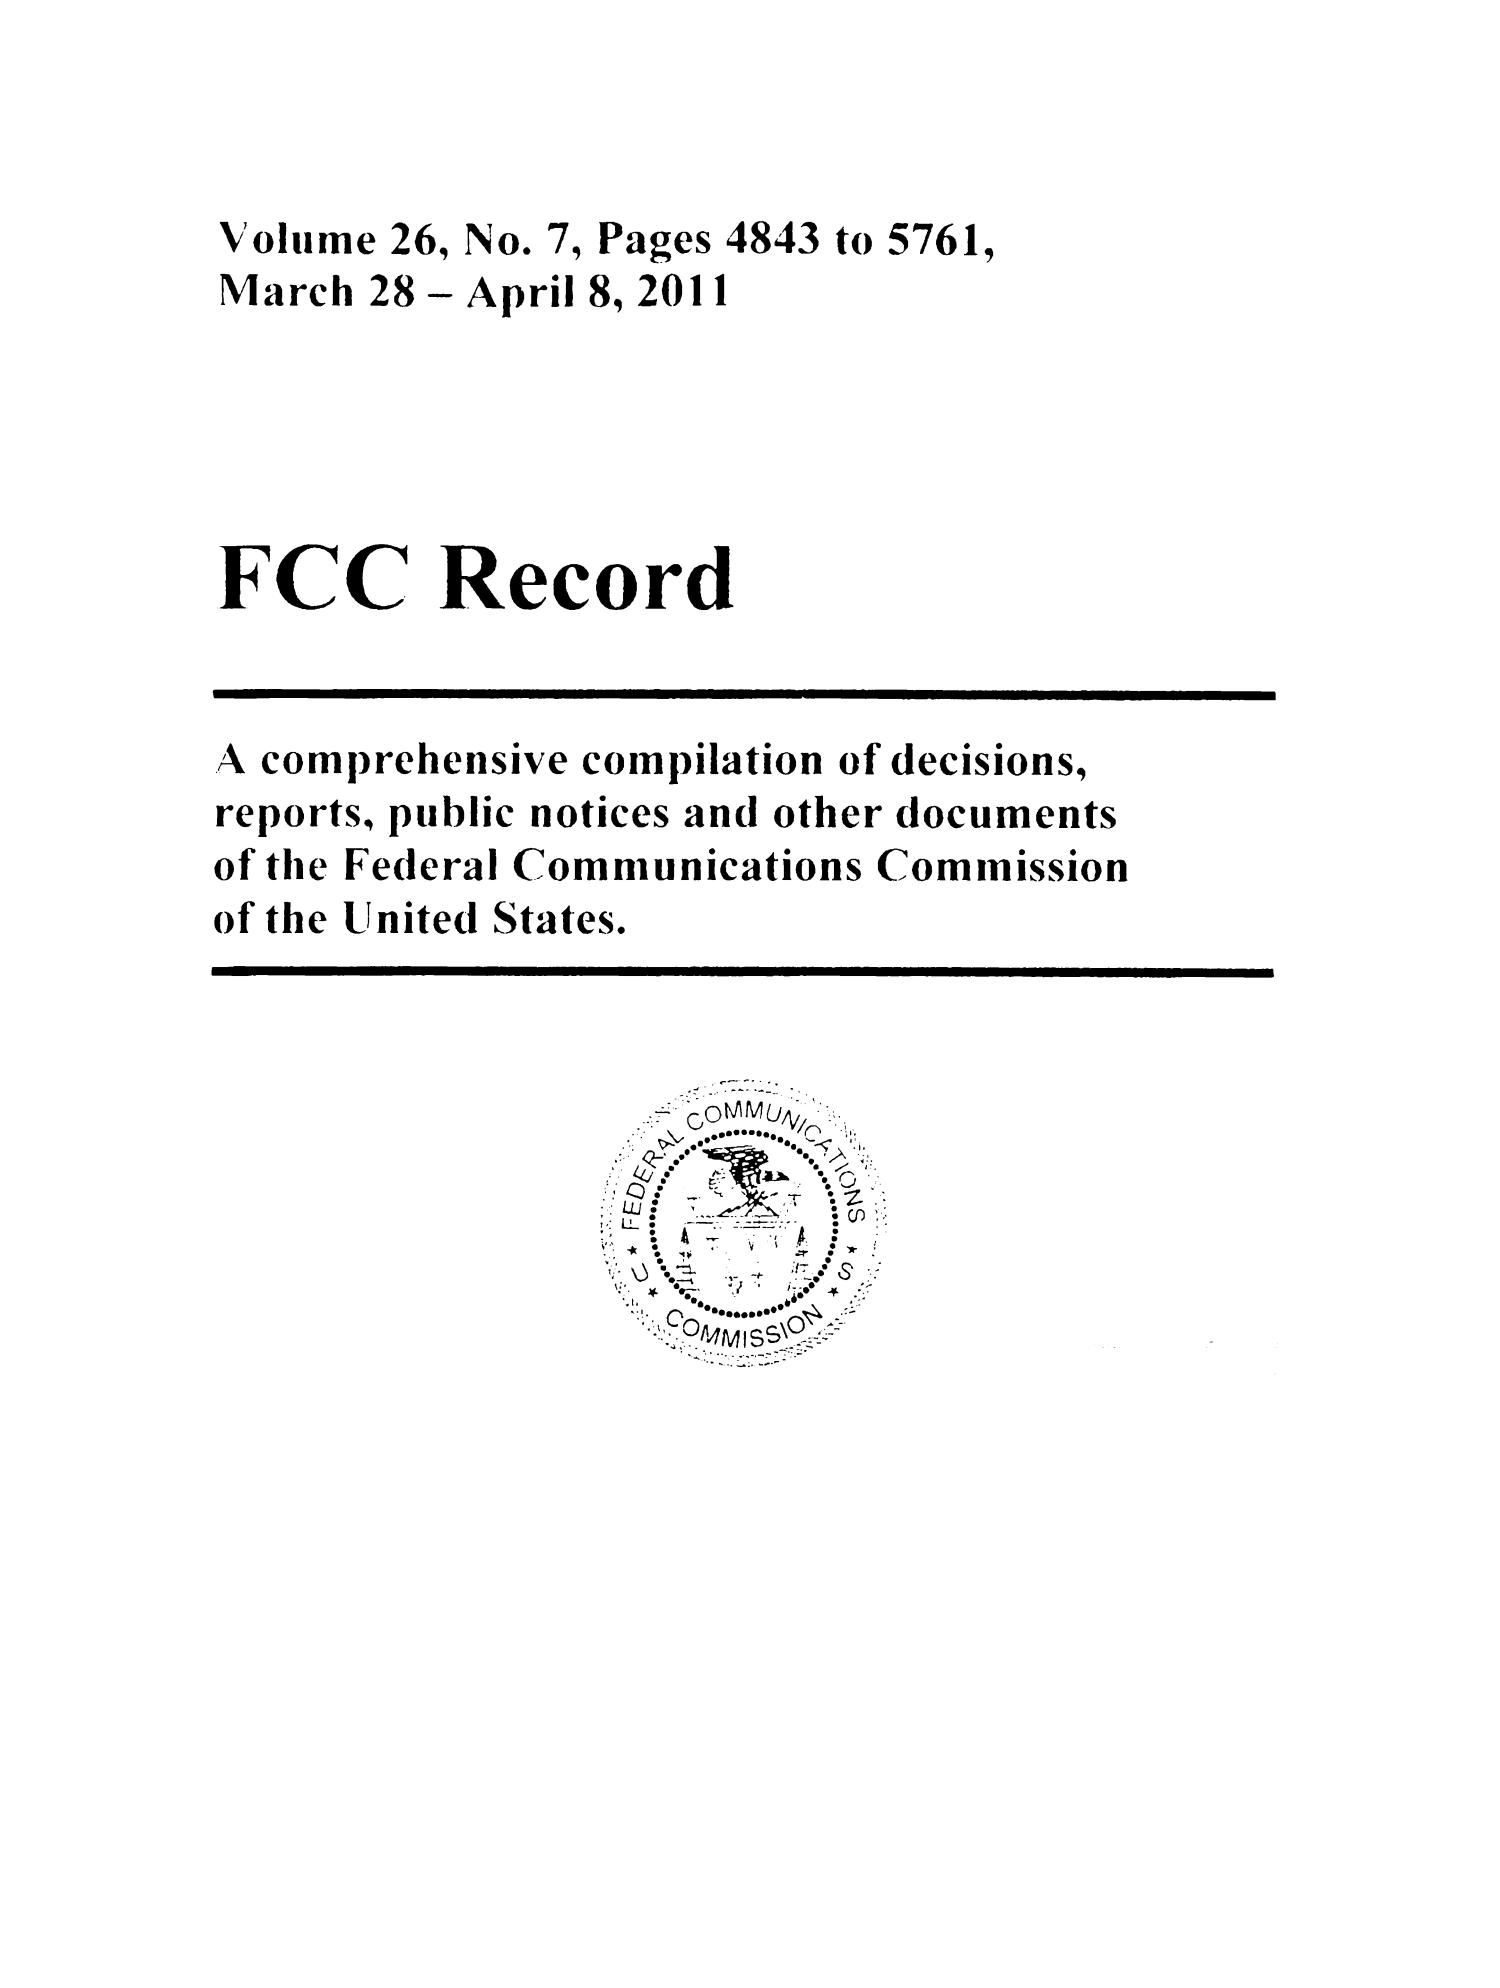 FCC Record, Volume 26, No. 7, Pages 4843 to 5761, March 28 - April 08, 2011
                                                
                                                    Title Page
                                                